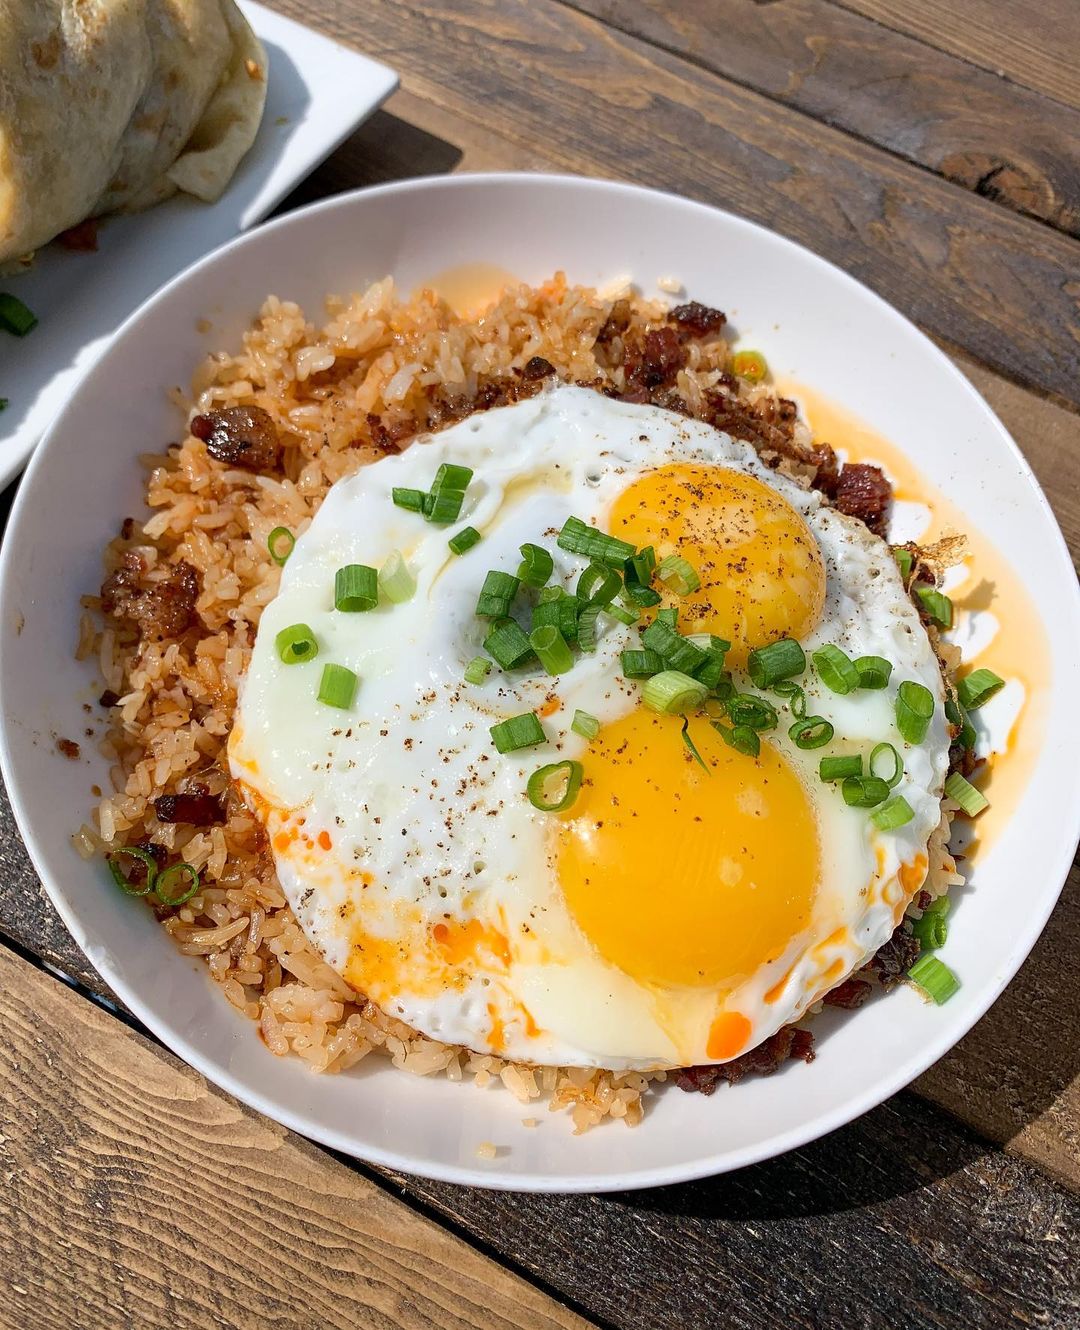 Plate of Bacon Fried Rice with Two Eggs on Top from OneFold in Denver. Photo by Instagram user @logansbitesandsights